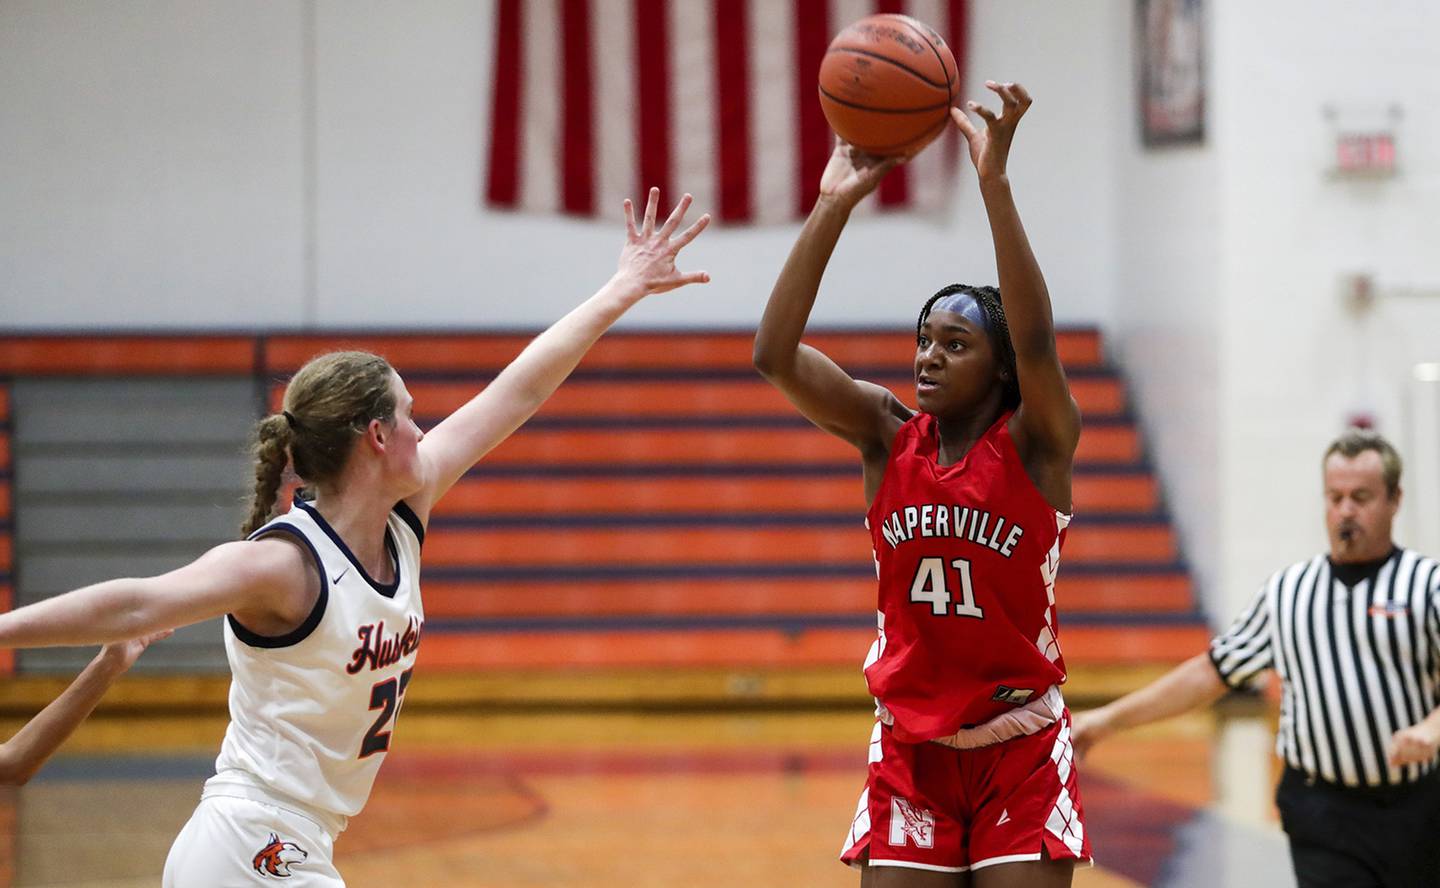 Naperville Central’s Trinity Jones (41) puts up a 3-point shot against Naperville North’s Peyton Fenner (23) during a DuPage Valley Conference game in Naperville on Wednesday, Dec. 14, 2022. 